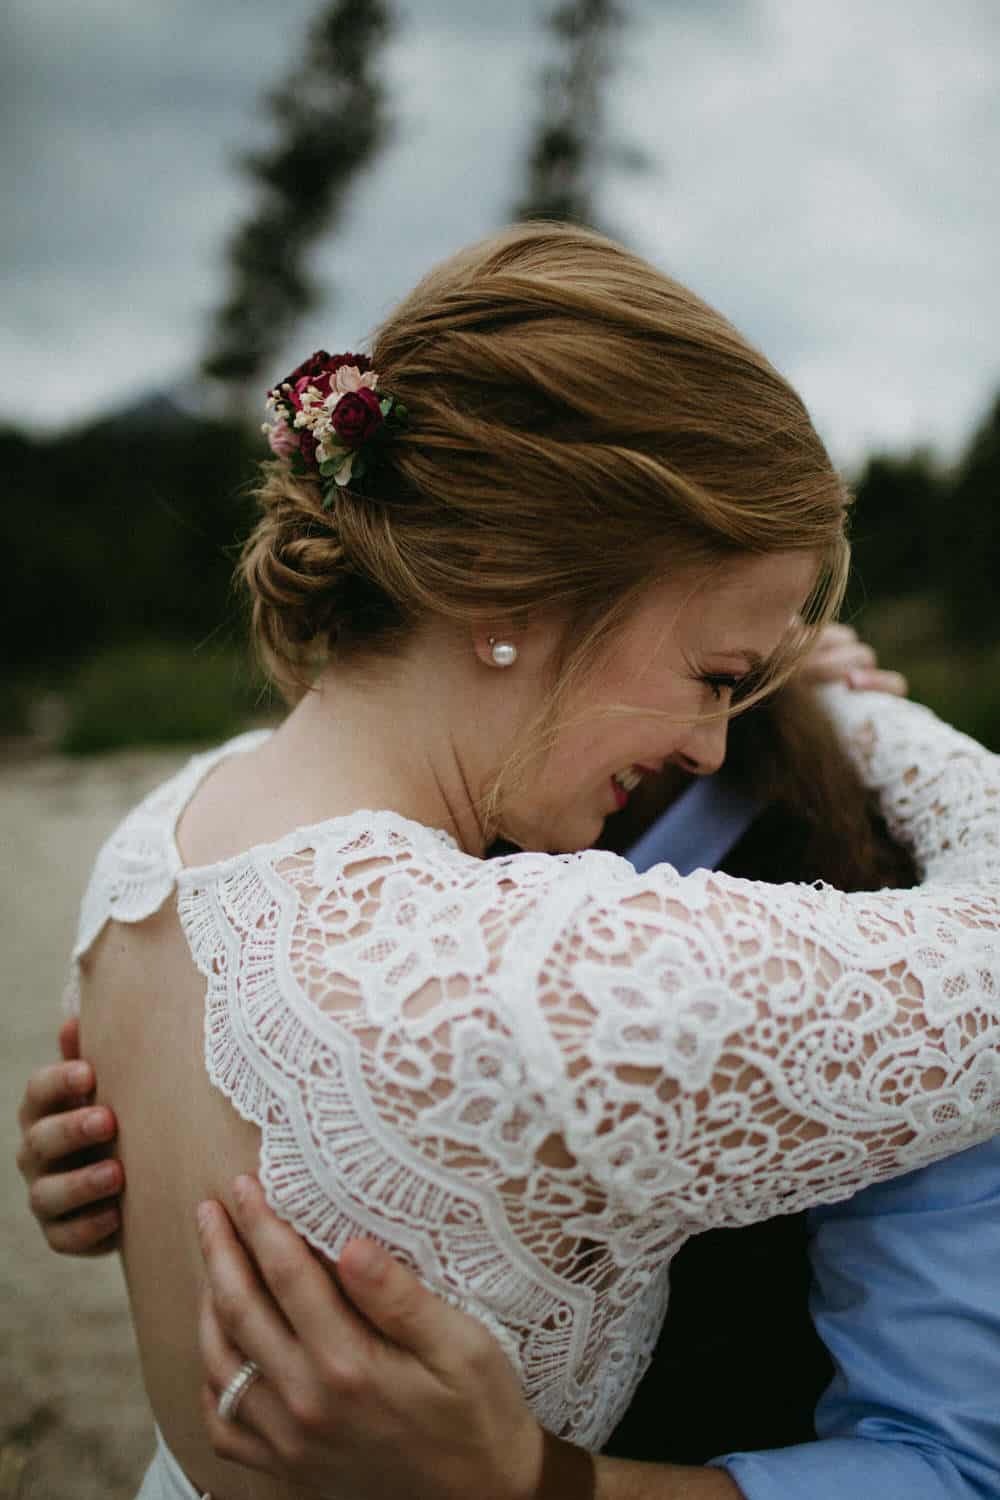 Idaho Redfish Lake Elopement Caitlin and Brandon's Wedding Christine Marie Photography Simply Eloped 3